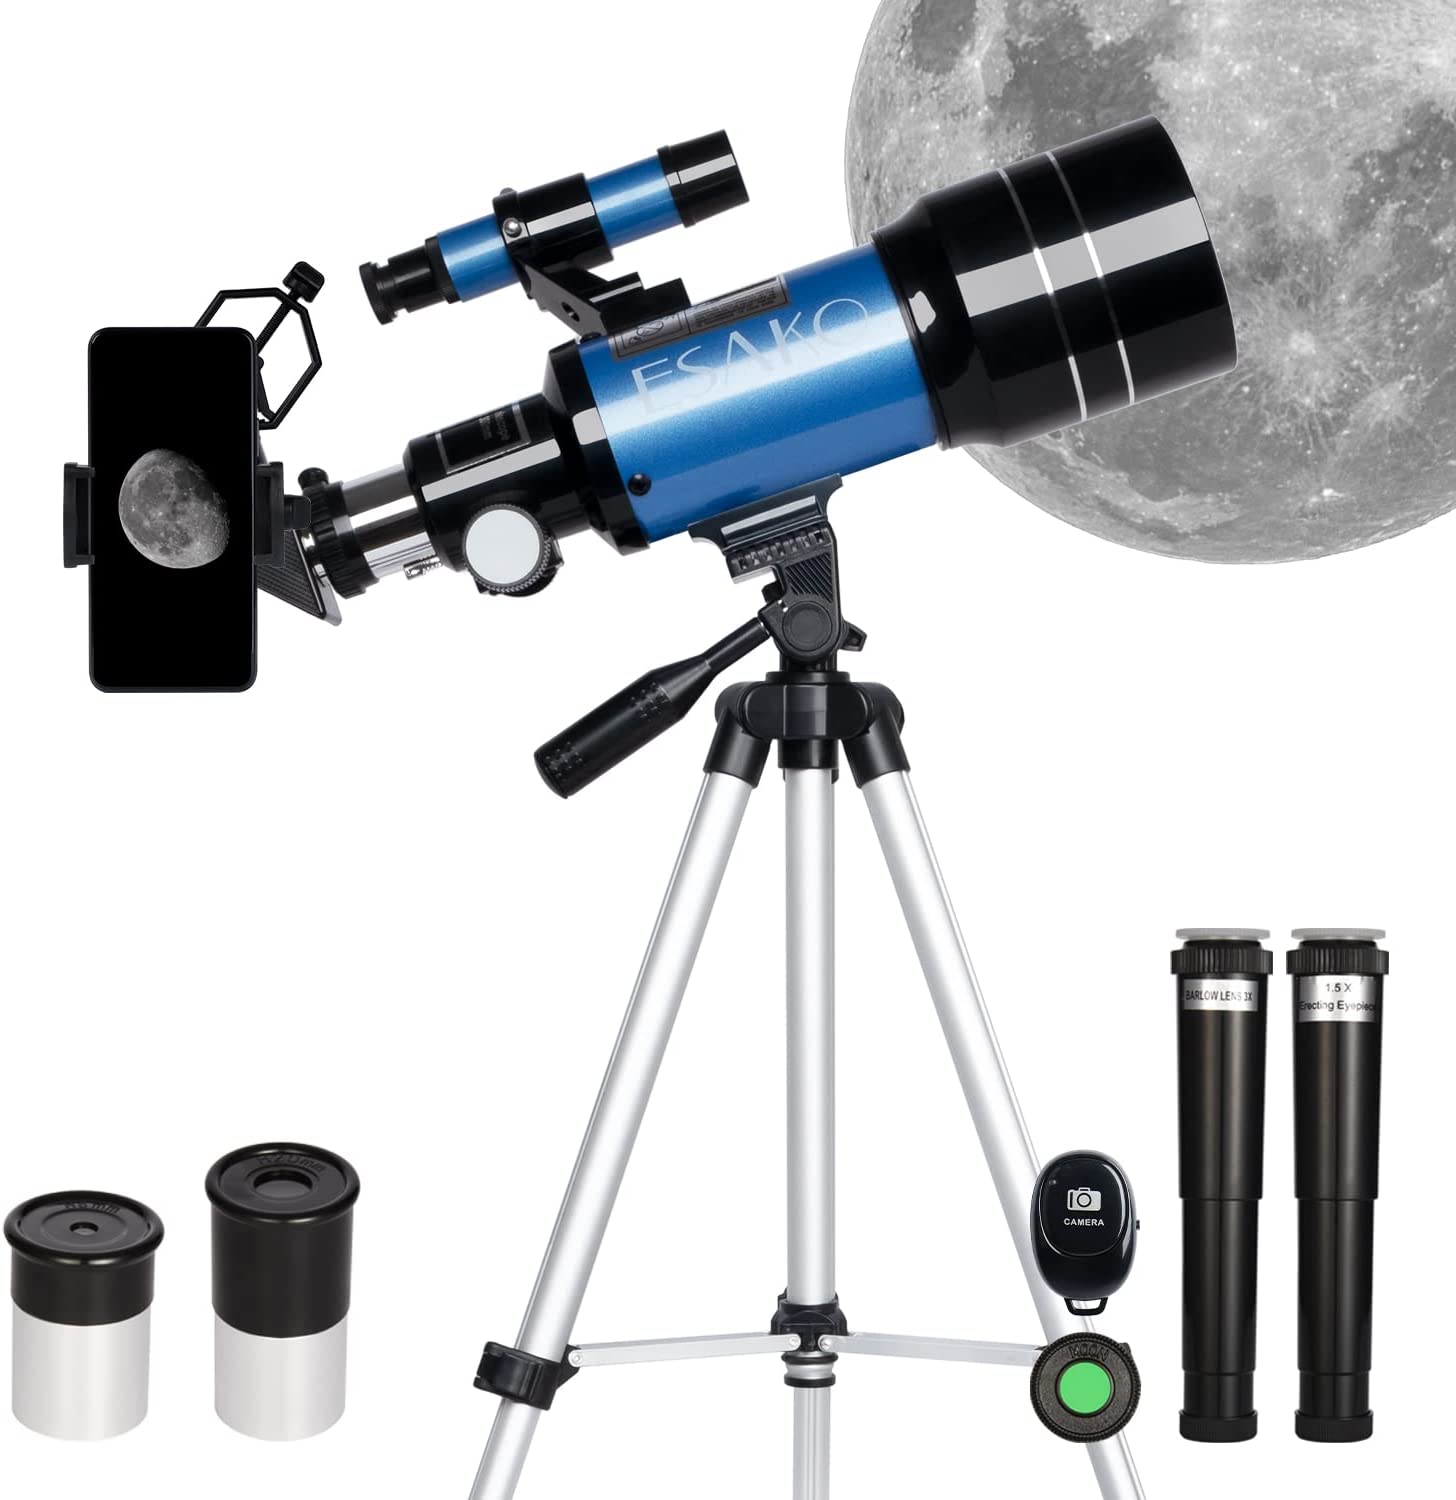 ESAKO Telescope for Kids & Beginners 70mm Portable Astronomical Telescopes with Phone Mount Moon Filter & 3X Barlow Lens 